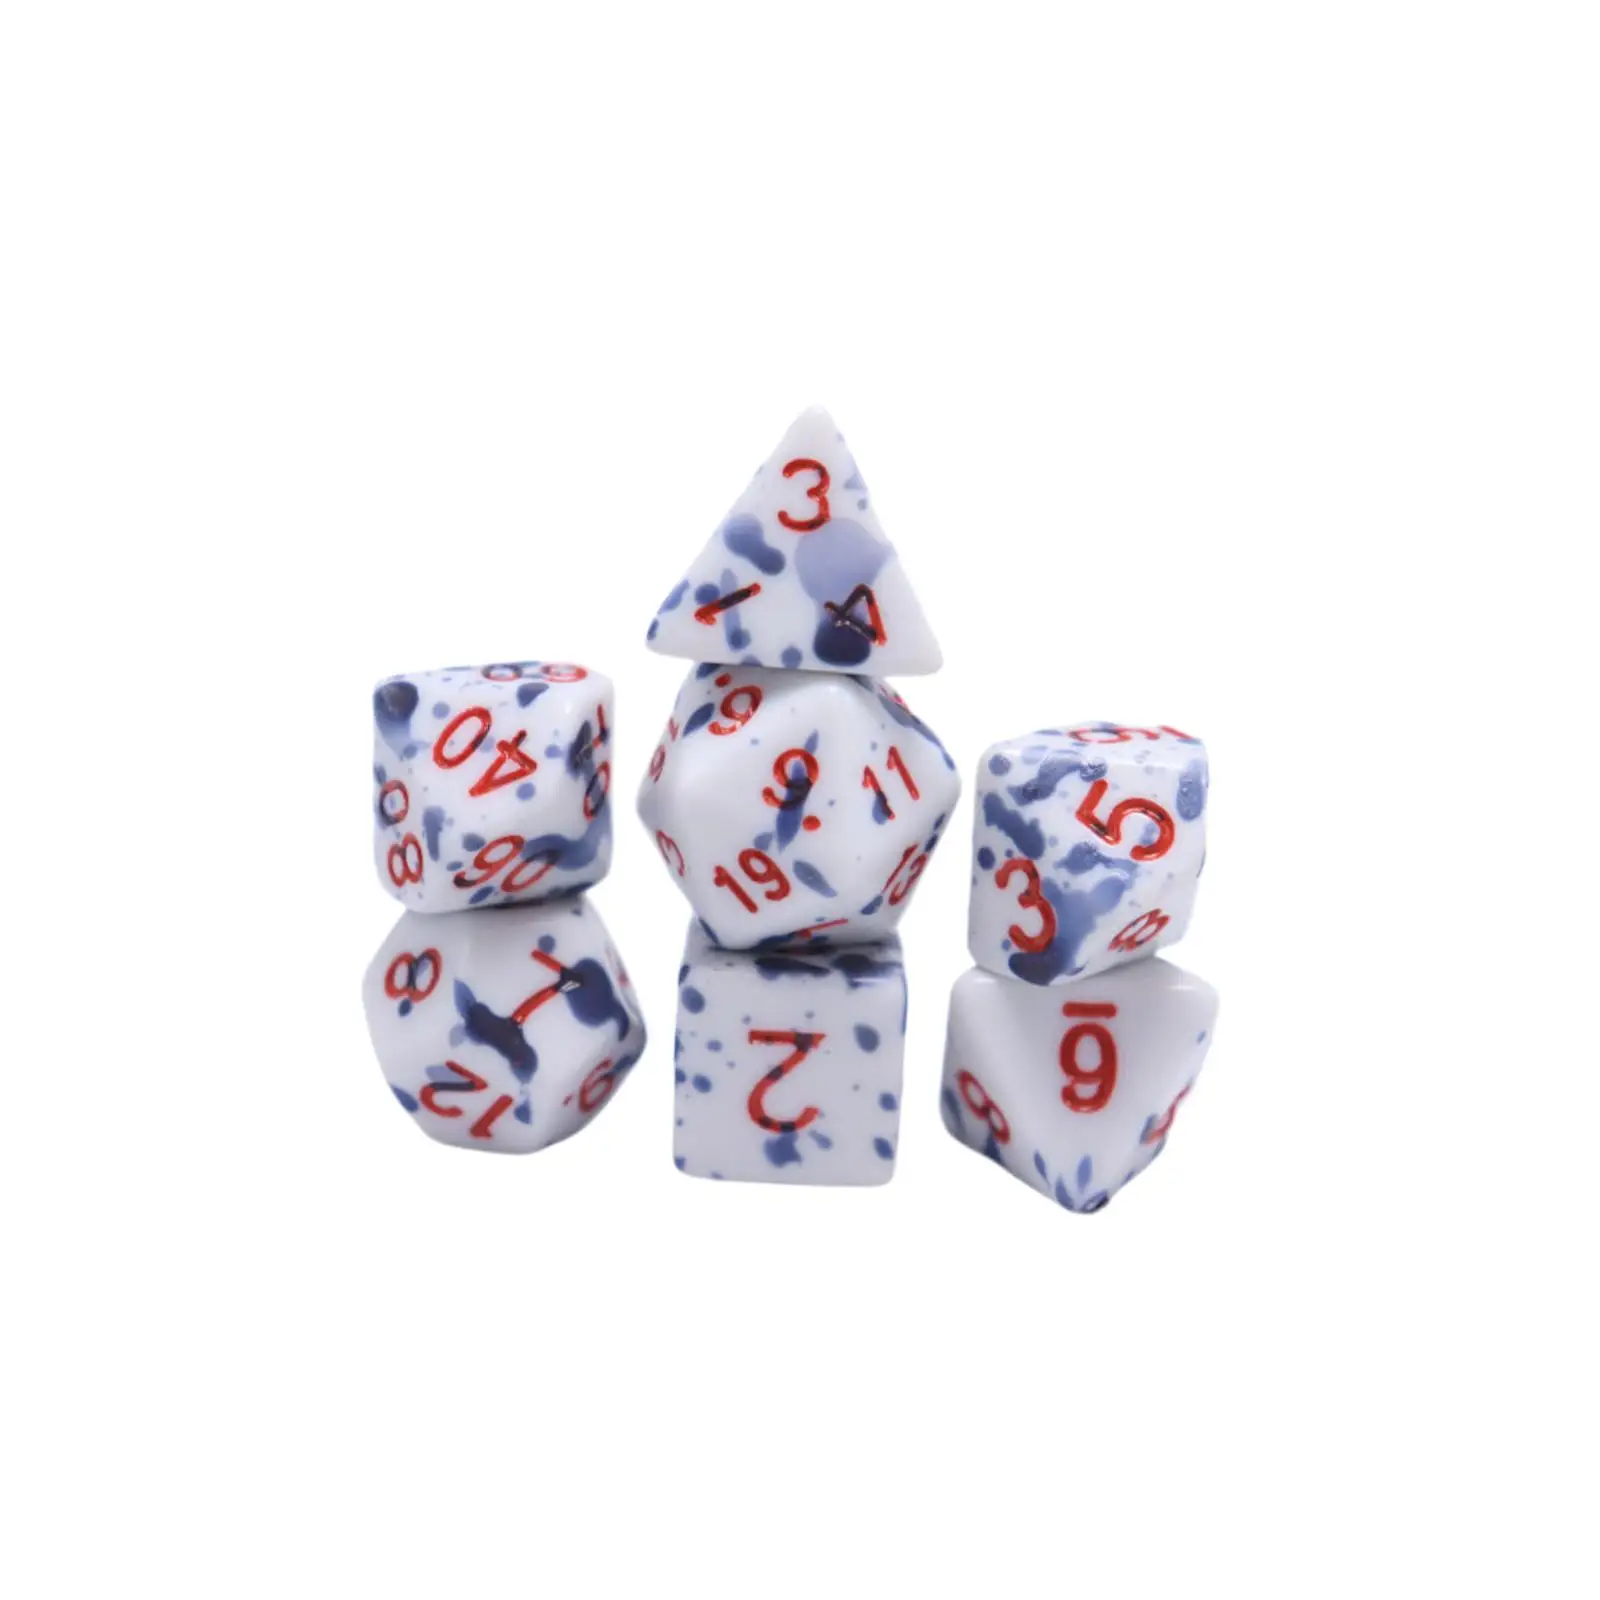 7 Pieces Table Gaming Dice Color Changing Dice for Role Playing Game Tabletop Game Collections Party Favors Entertainment Toy